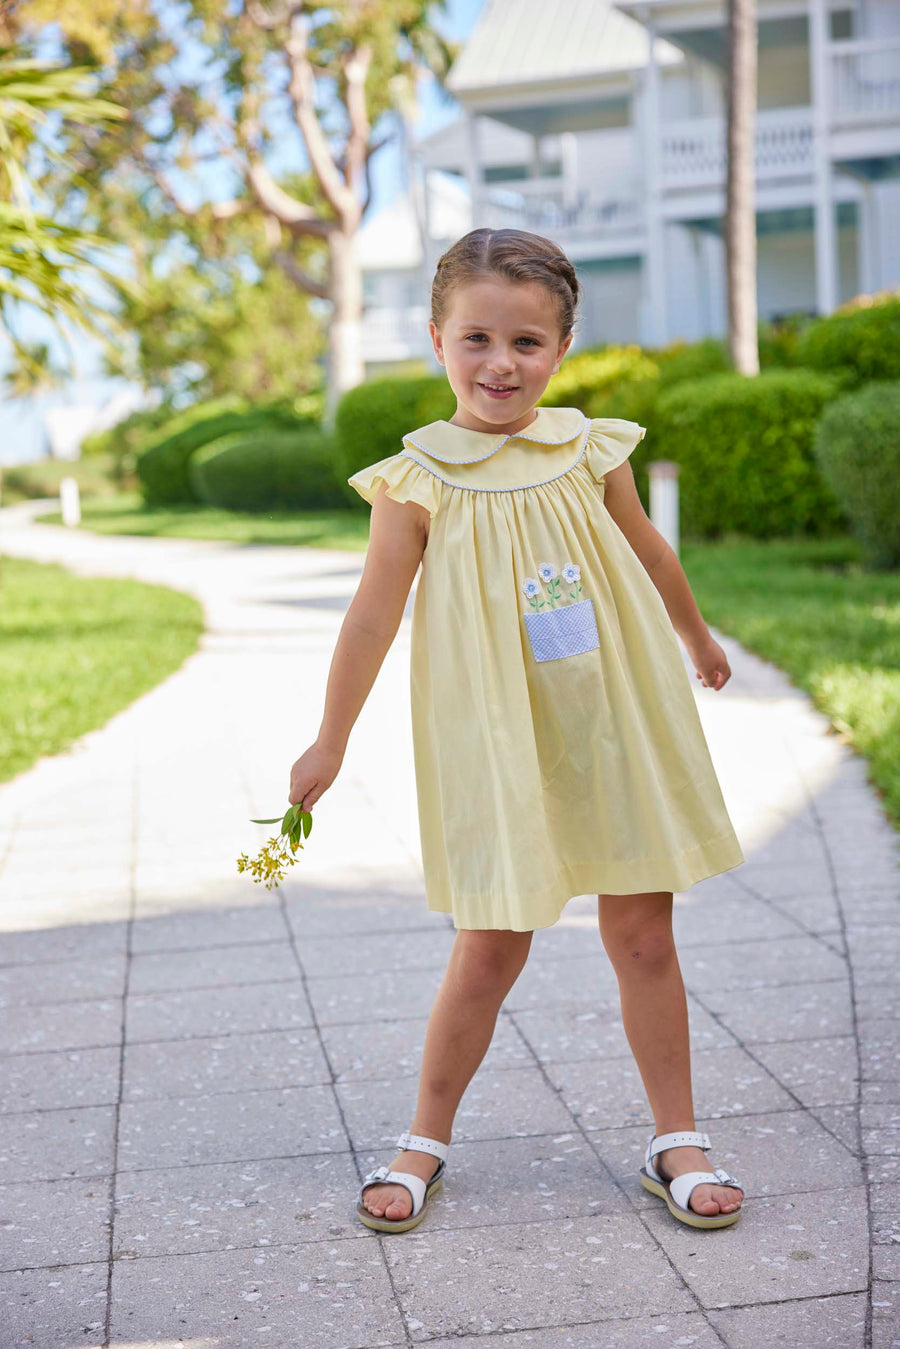 classic childrens clothing yellow dress with peter pan collar and front pocket with daisy embroidery